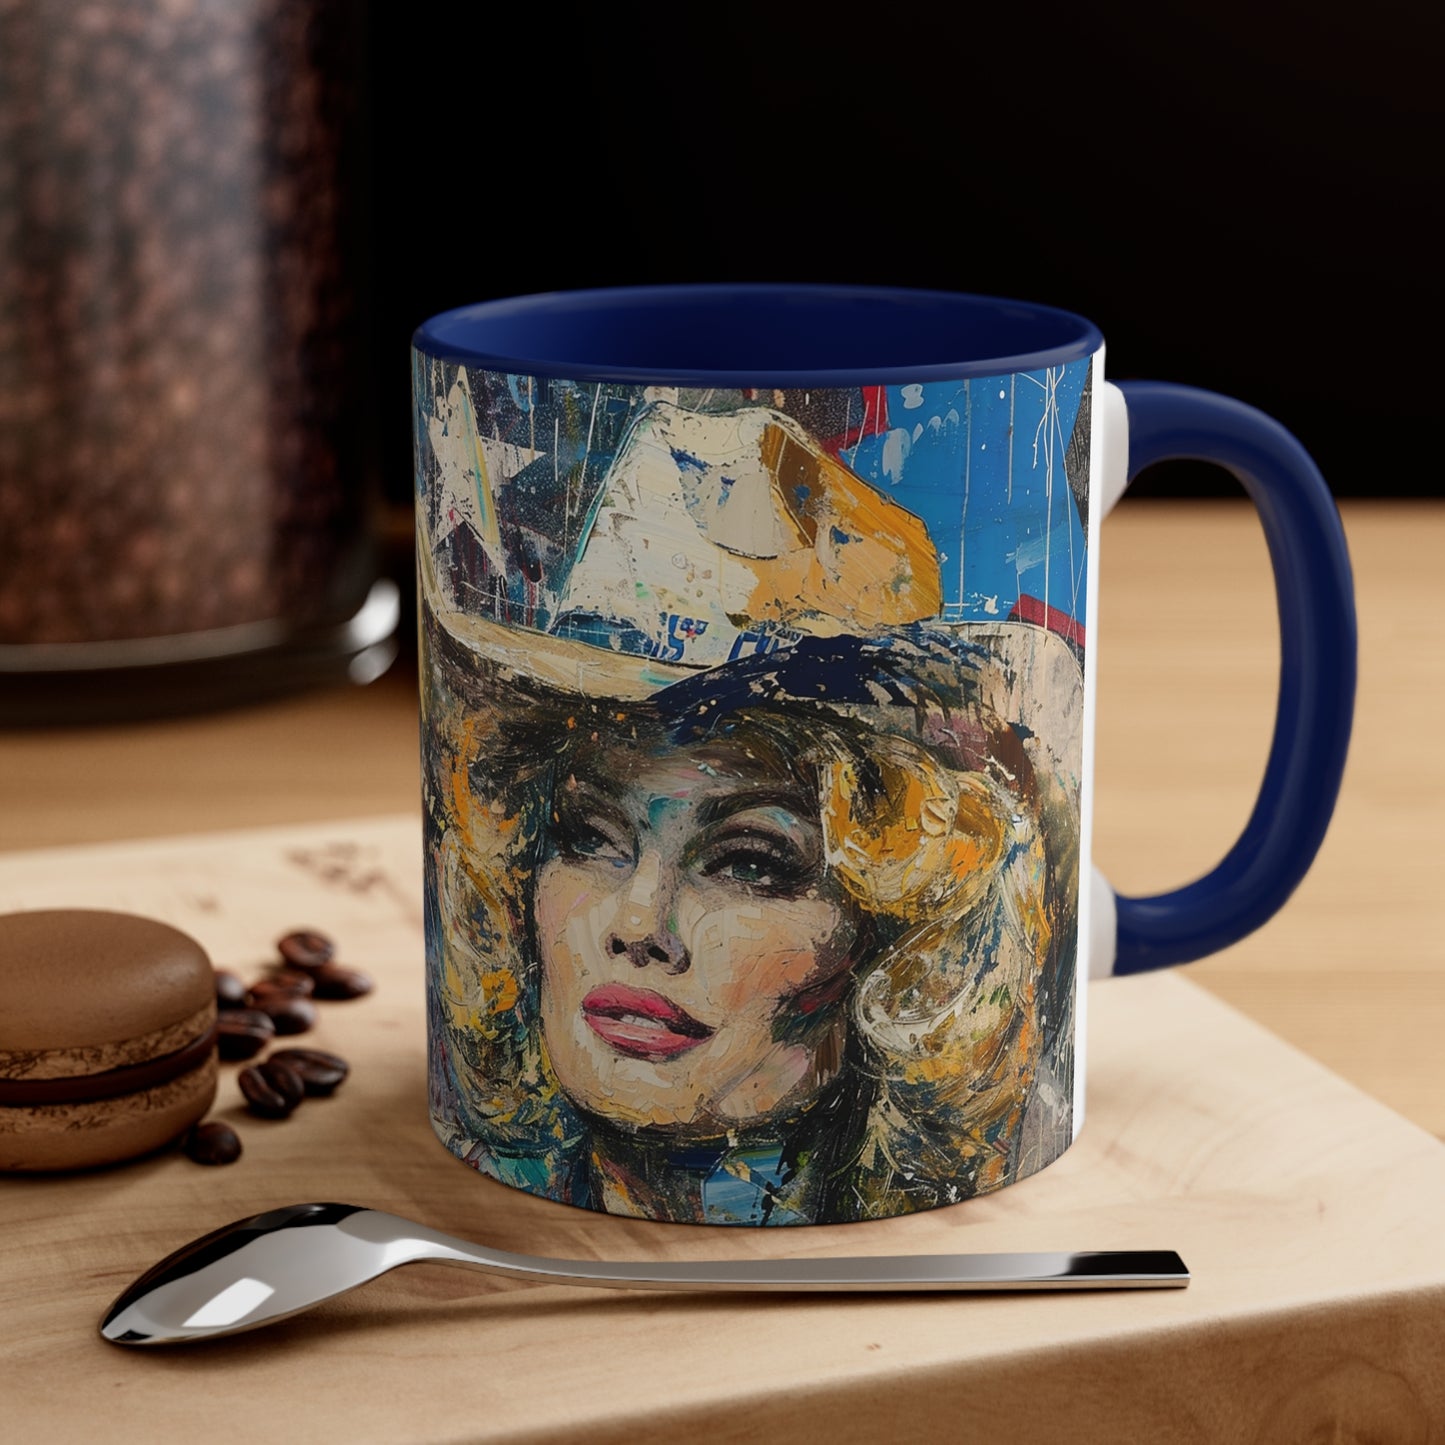 Accent Coffee Mug, 11oz - Country Queen navy